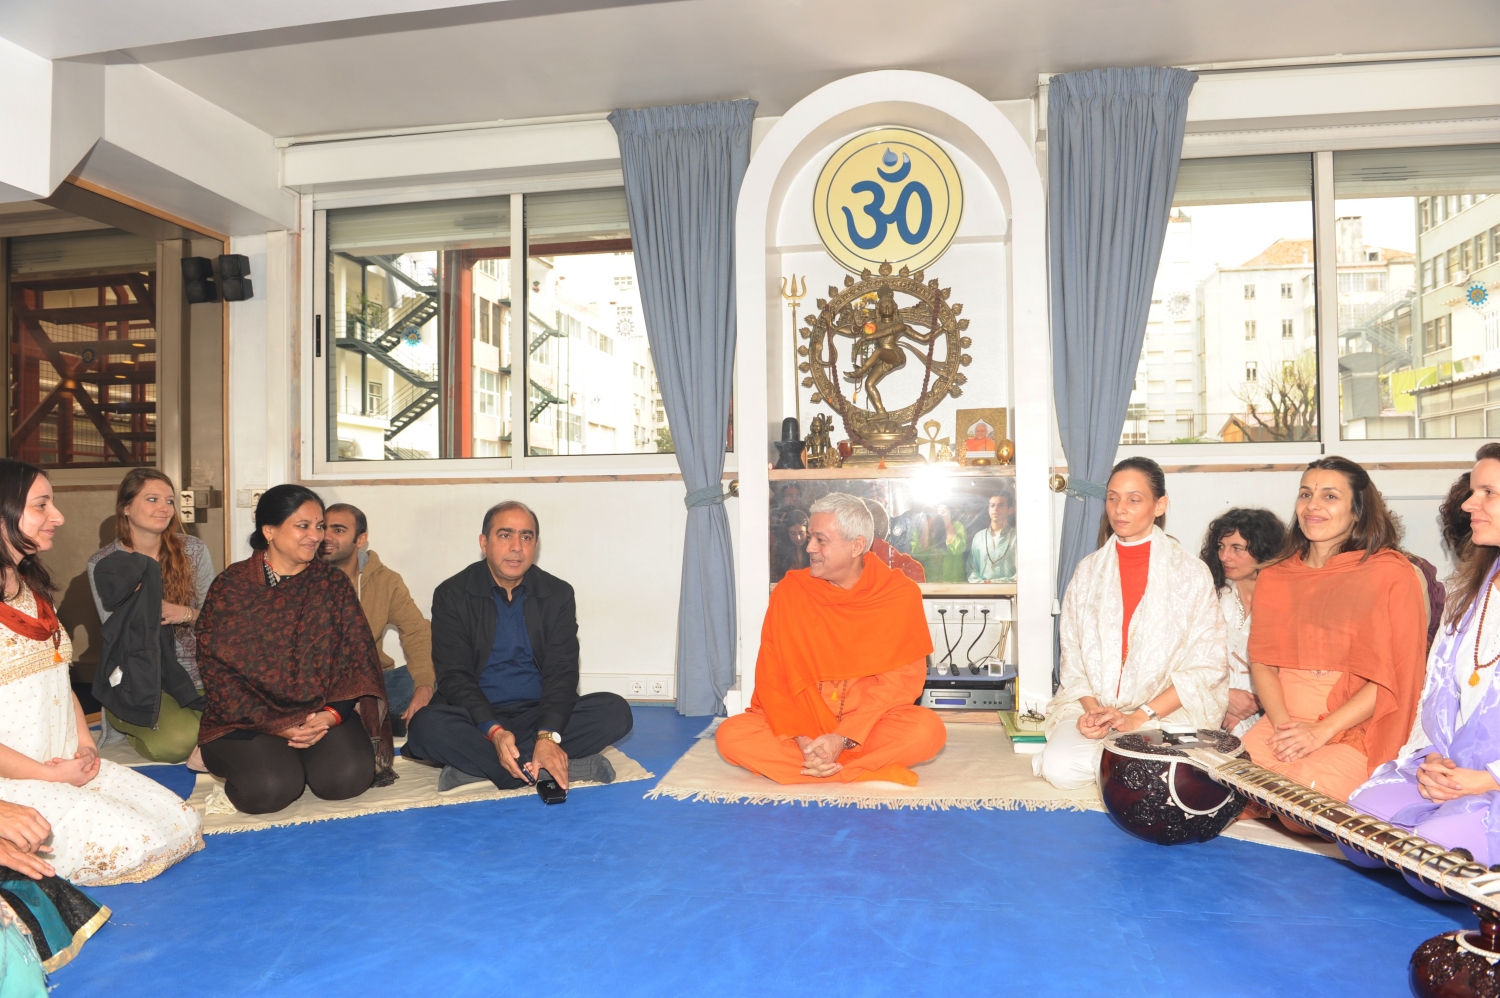 Visit of His Excellency Jitendra Natrh Misra - Ambassador of India in Portugal - at the Headquarters of the Portuguese Yoga Confederation, Lisboa – 2015